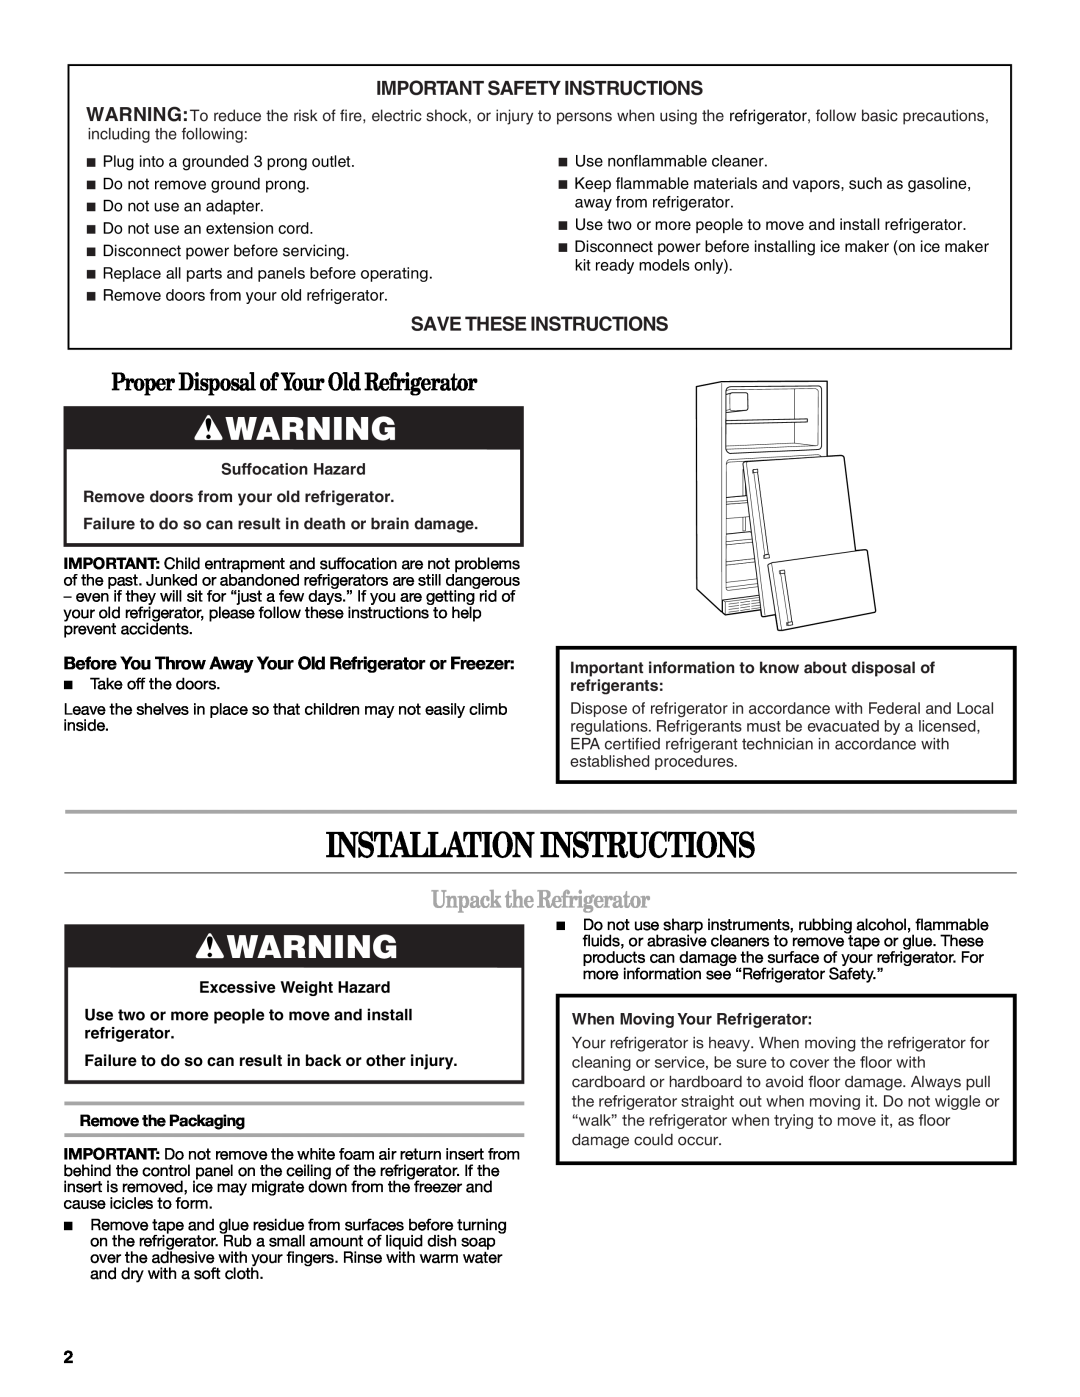 Whirlpool W10343810A Installation Instructions, Proper Disposal of Your Old Refrigerator, Unpack the Refrigerator 